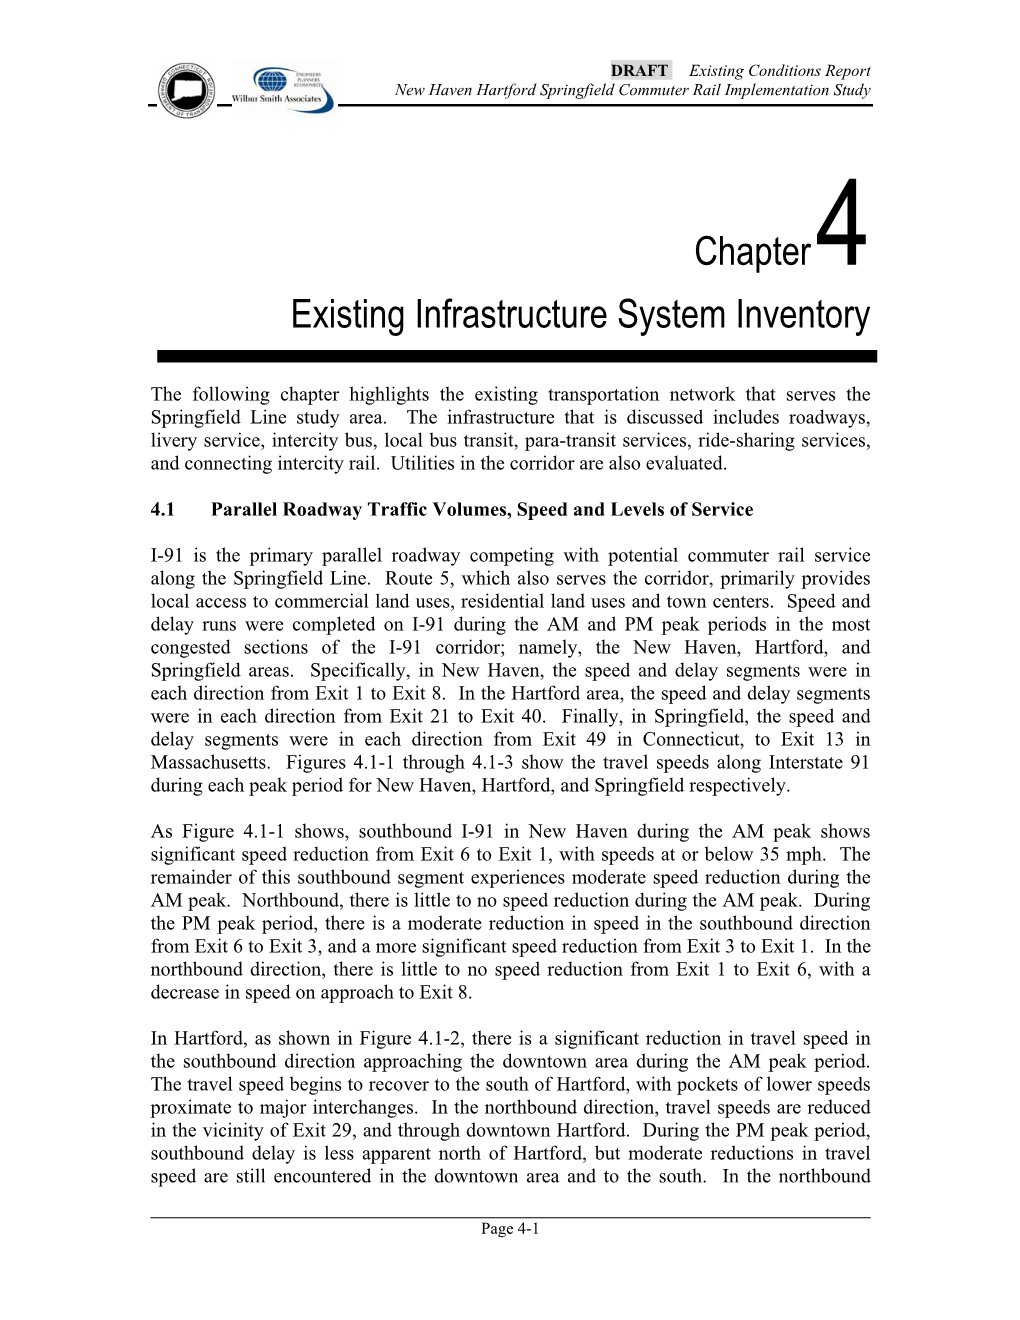 Chapter4 Existing Infrastructure System Inventory